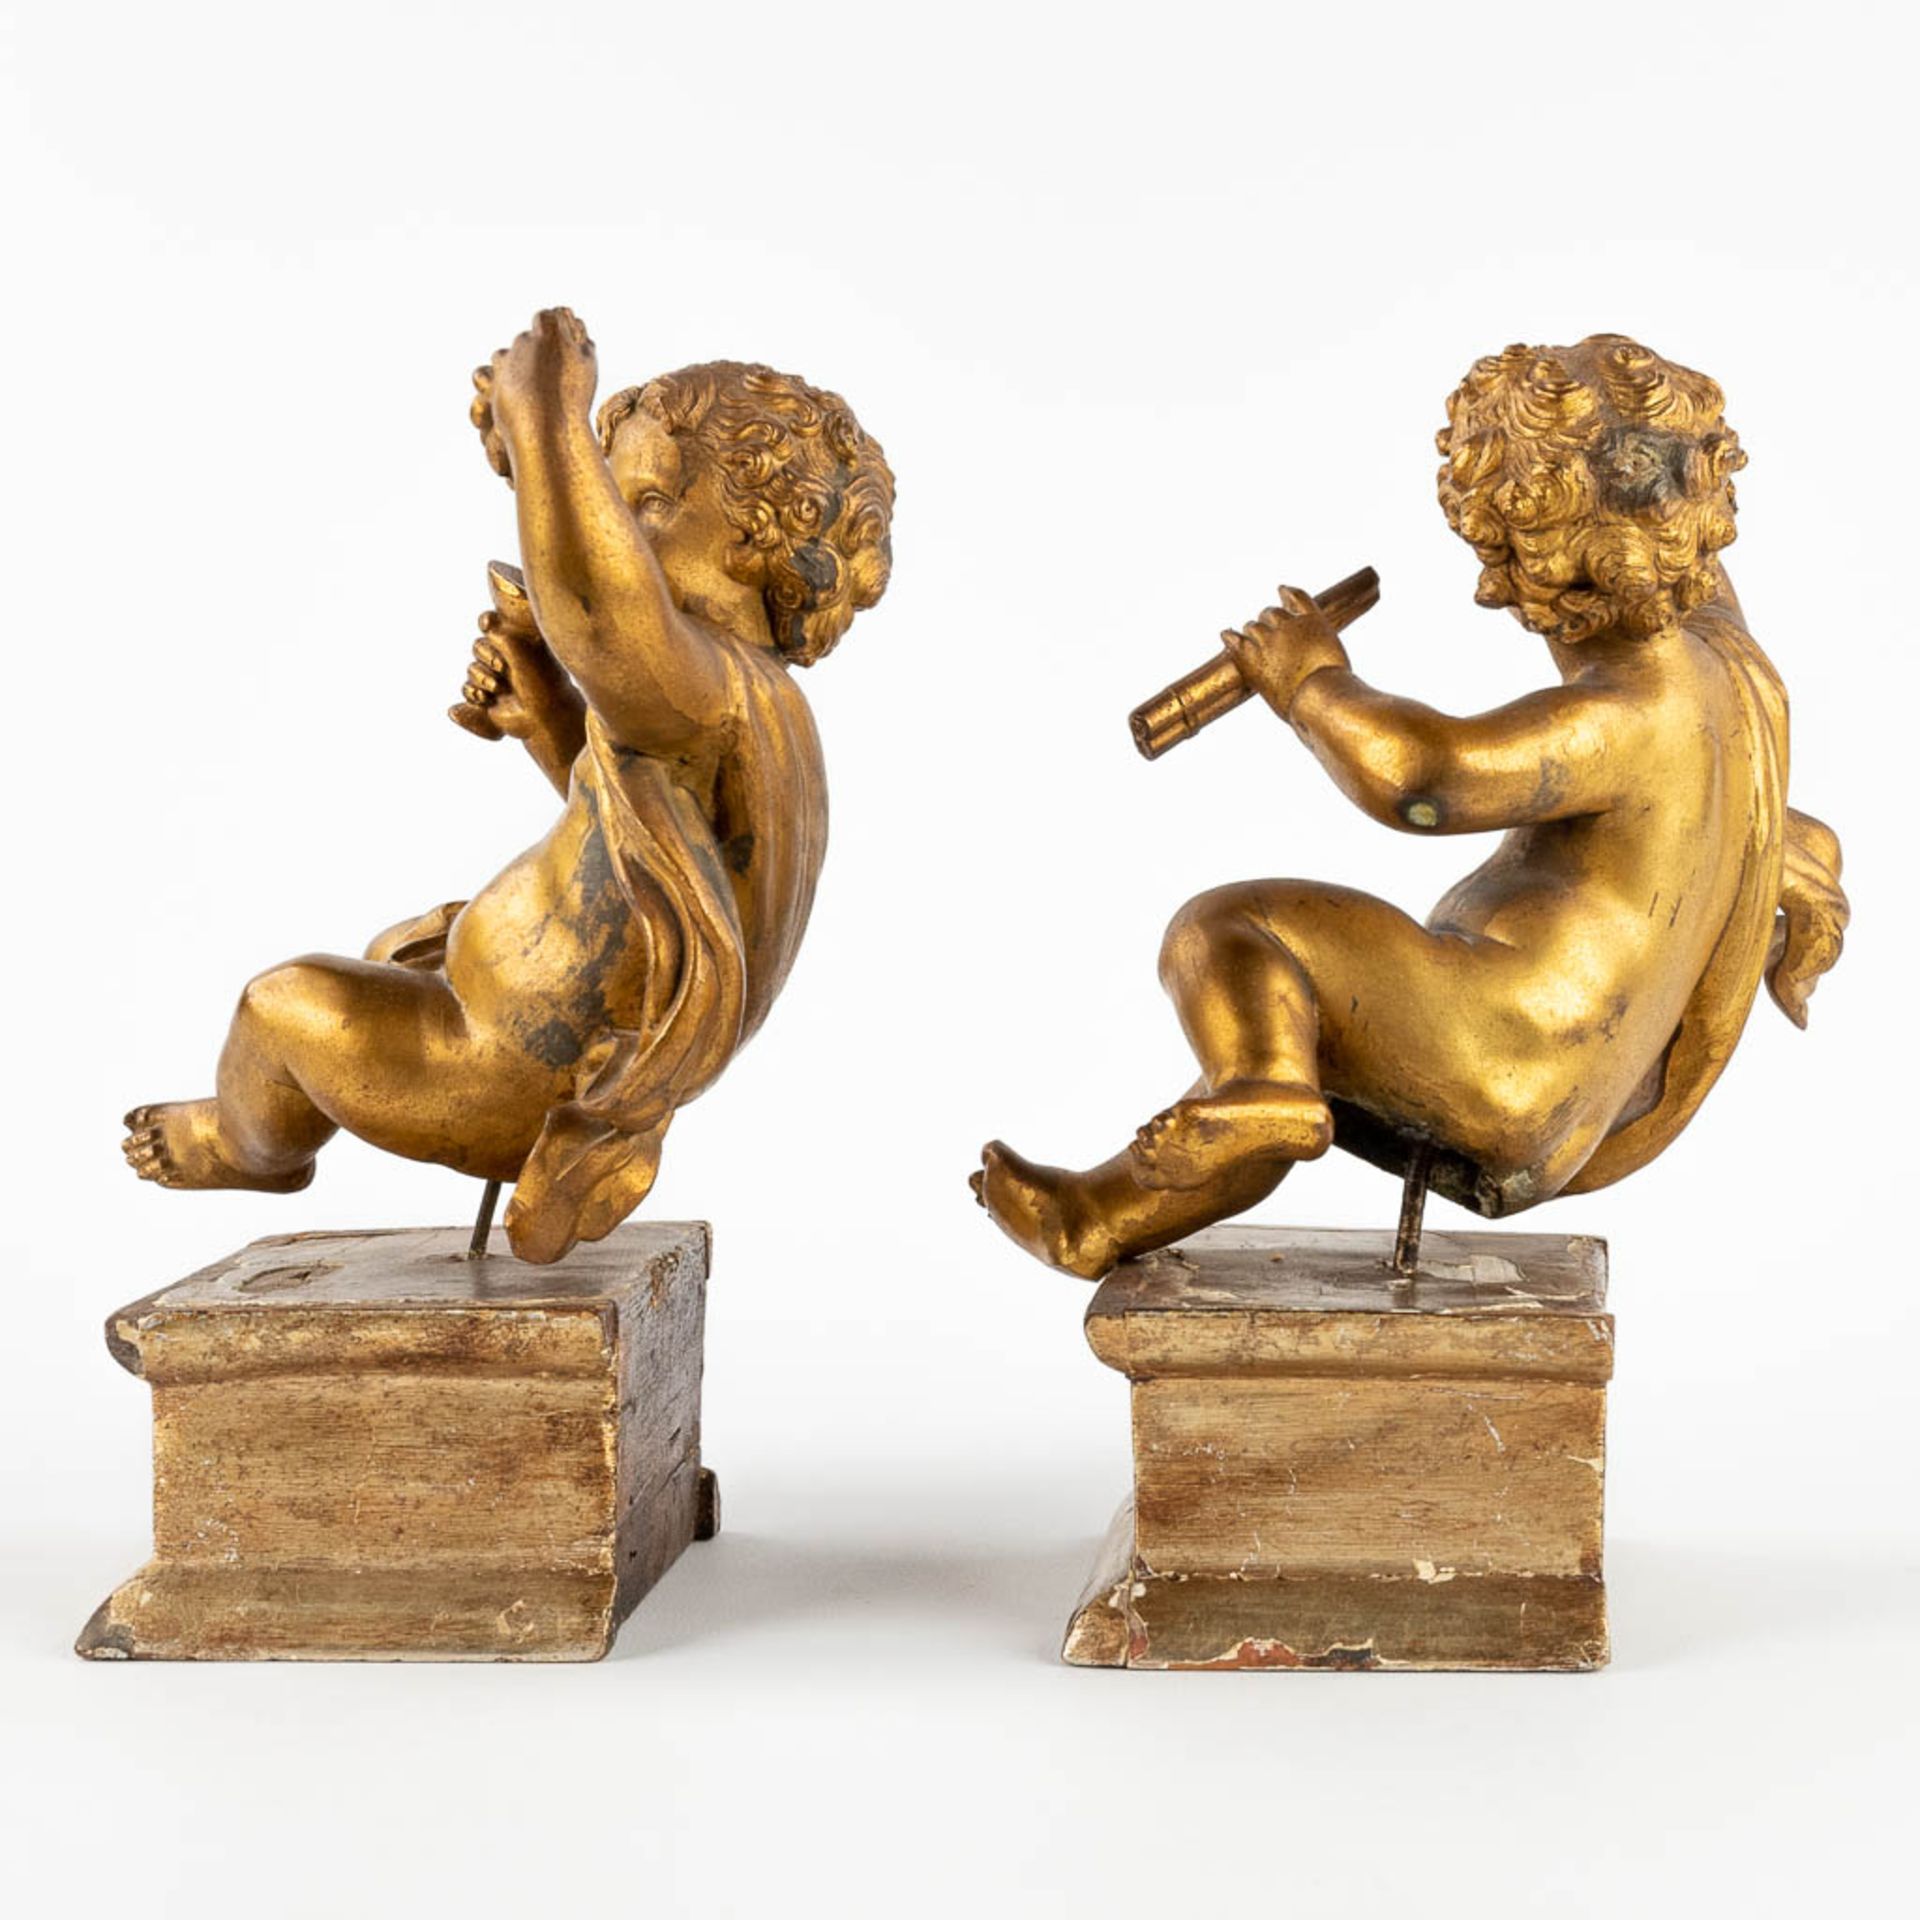 A pair of angels, gilt spelter and mounted on a wood base. 19th C. (W:12 x H:18 cm) - Image 6 of 14